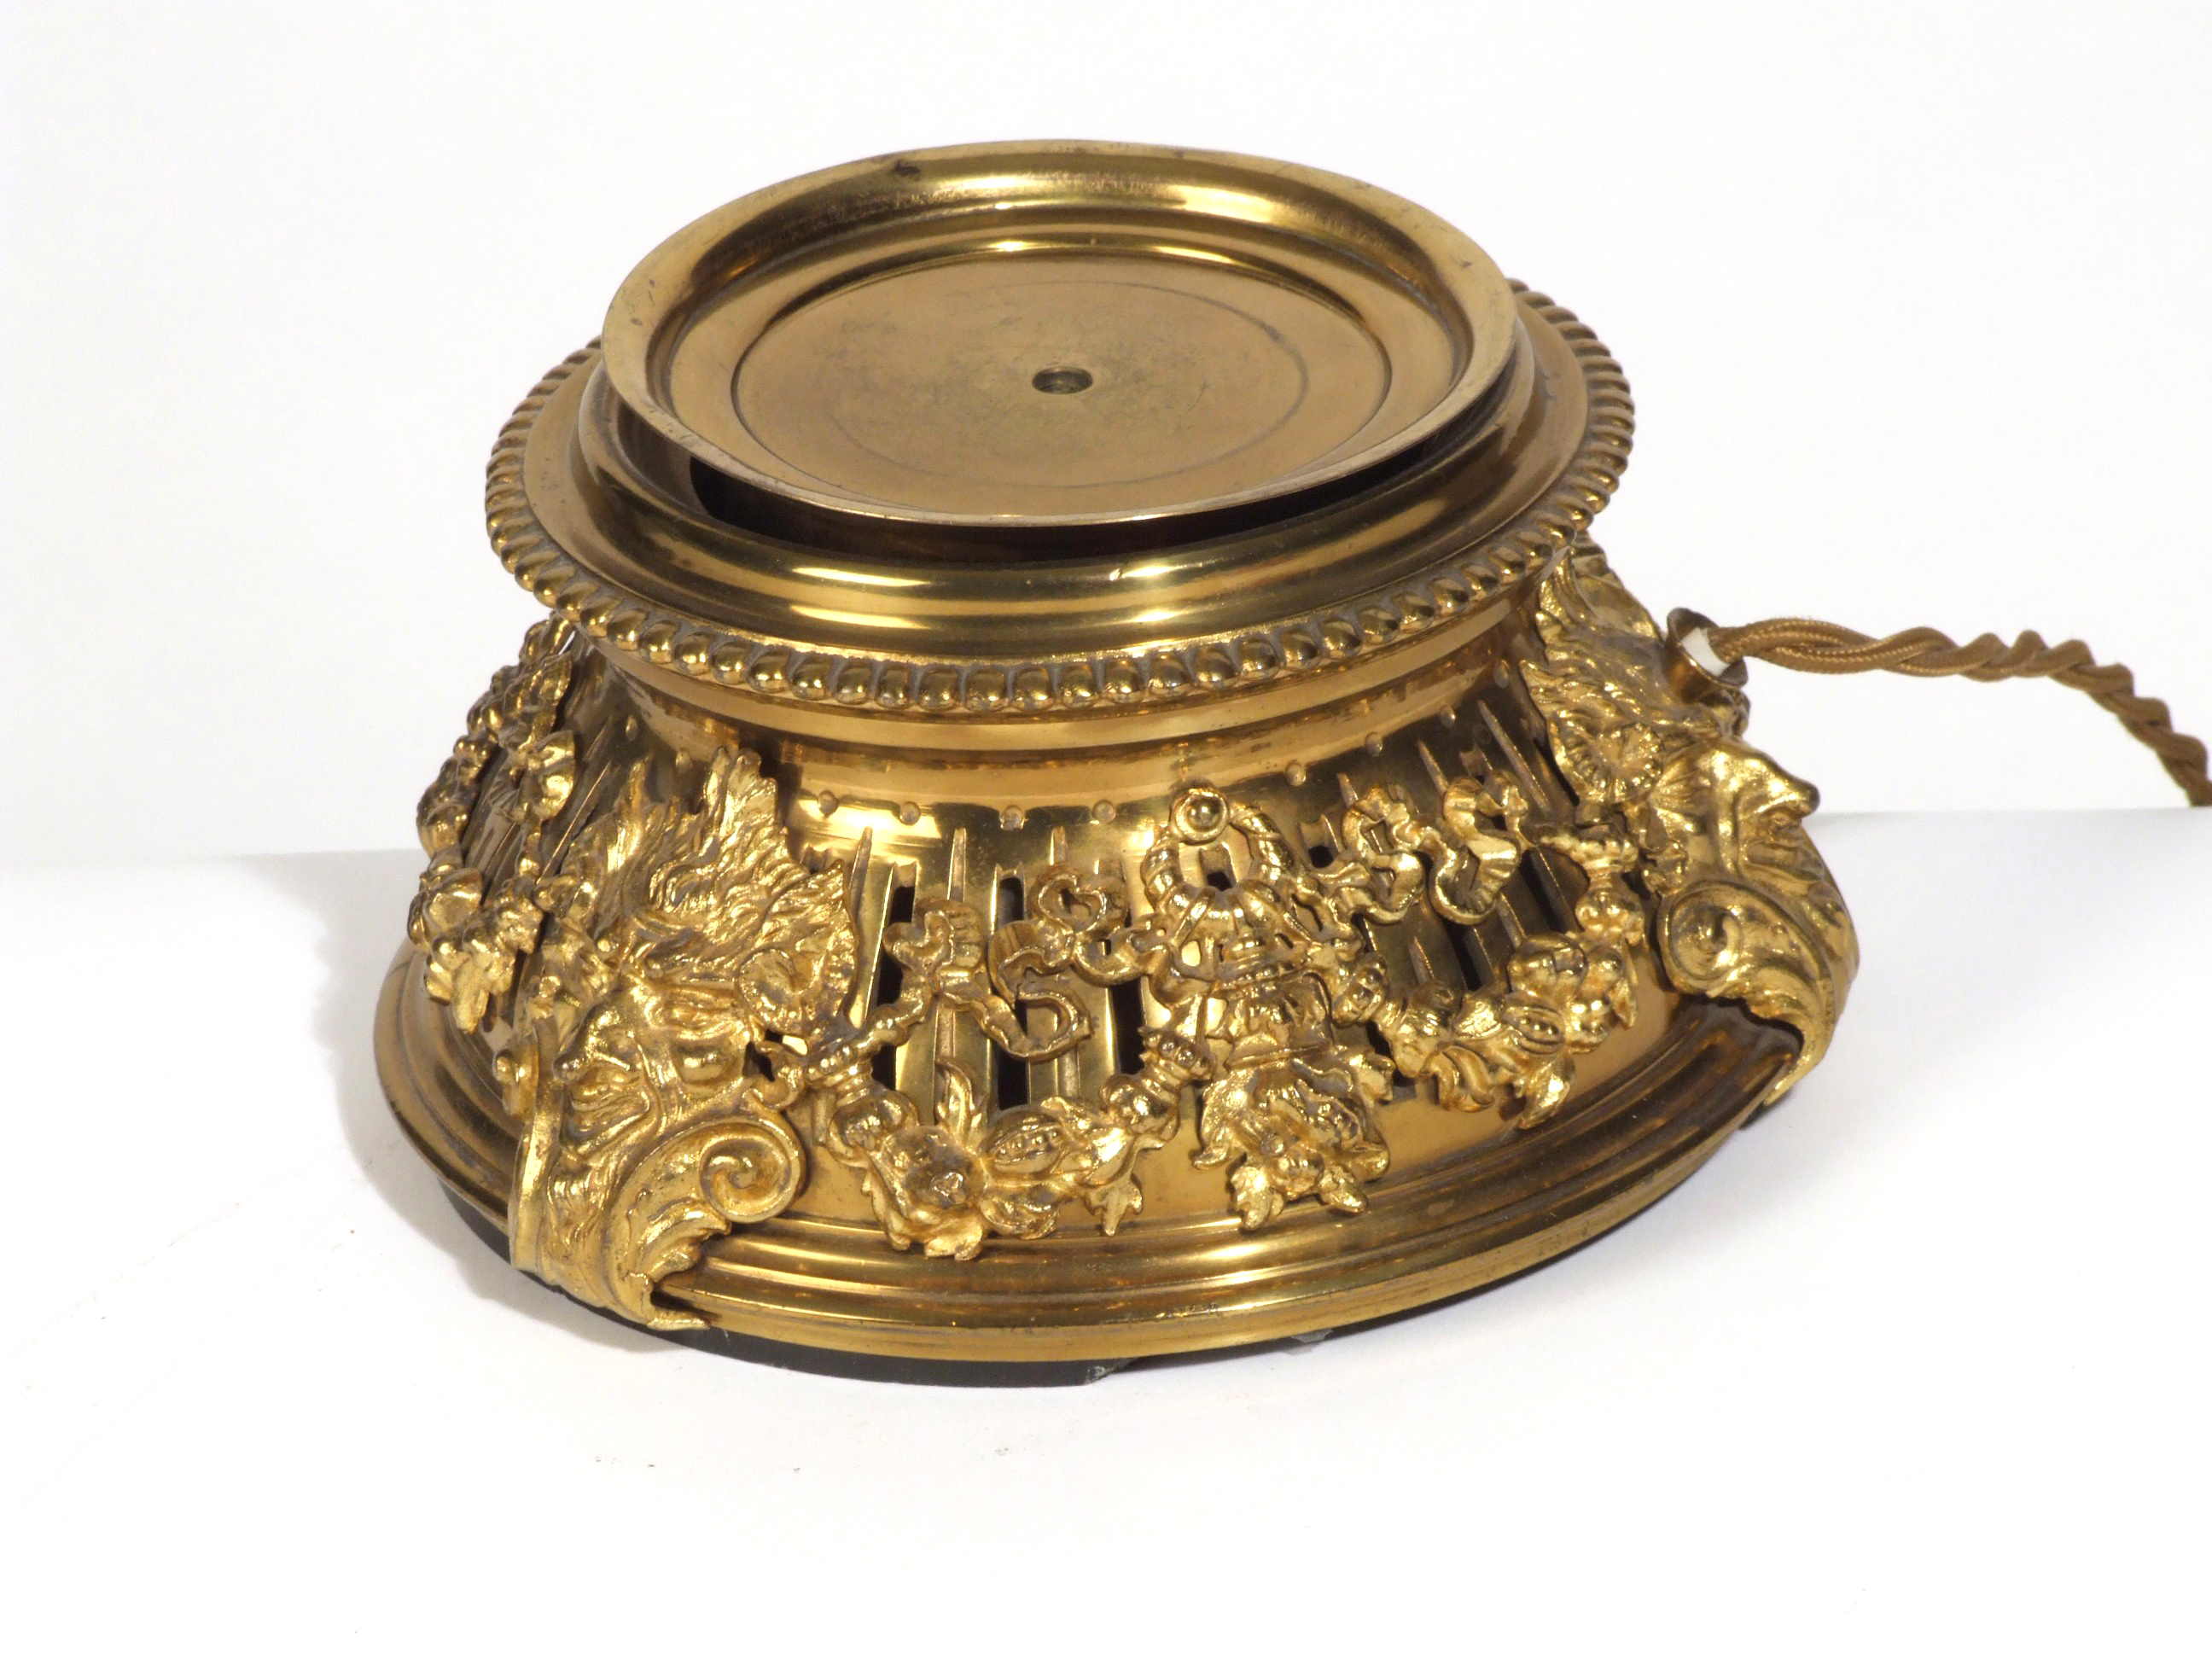 Small, round, ornate gold metal stand with a wire trailing from it.